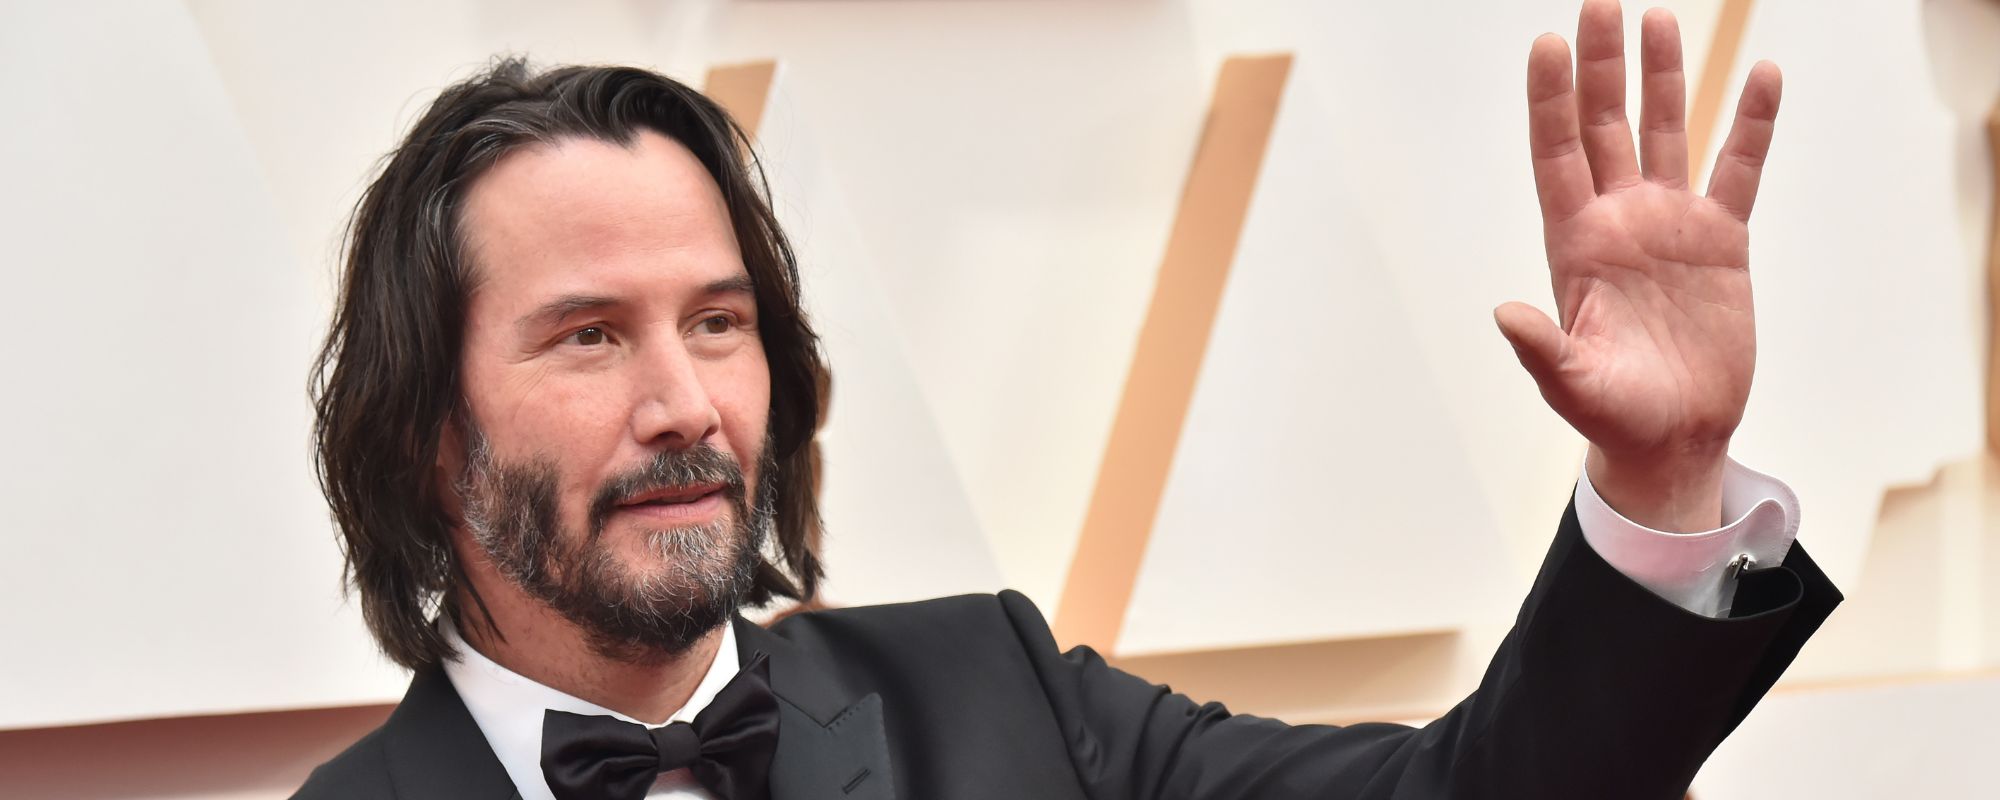 Keanu Reeves Says John Wick: Chapter 4 Is Hardest Physical Role